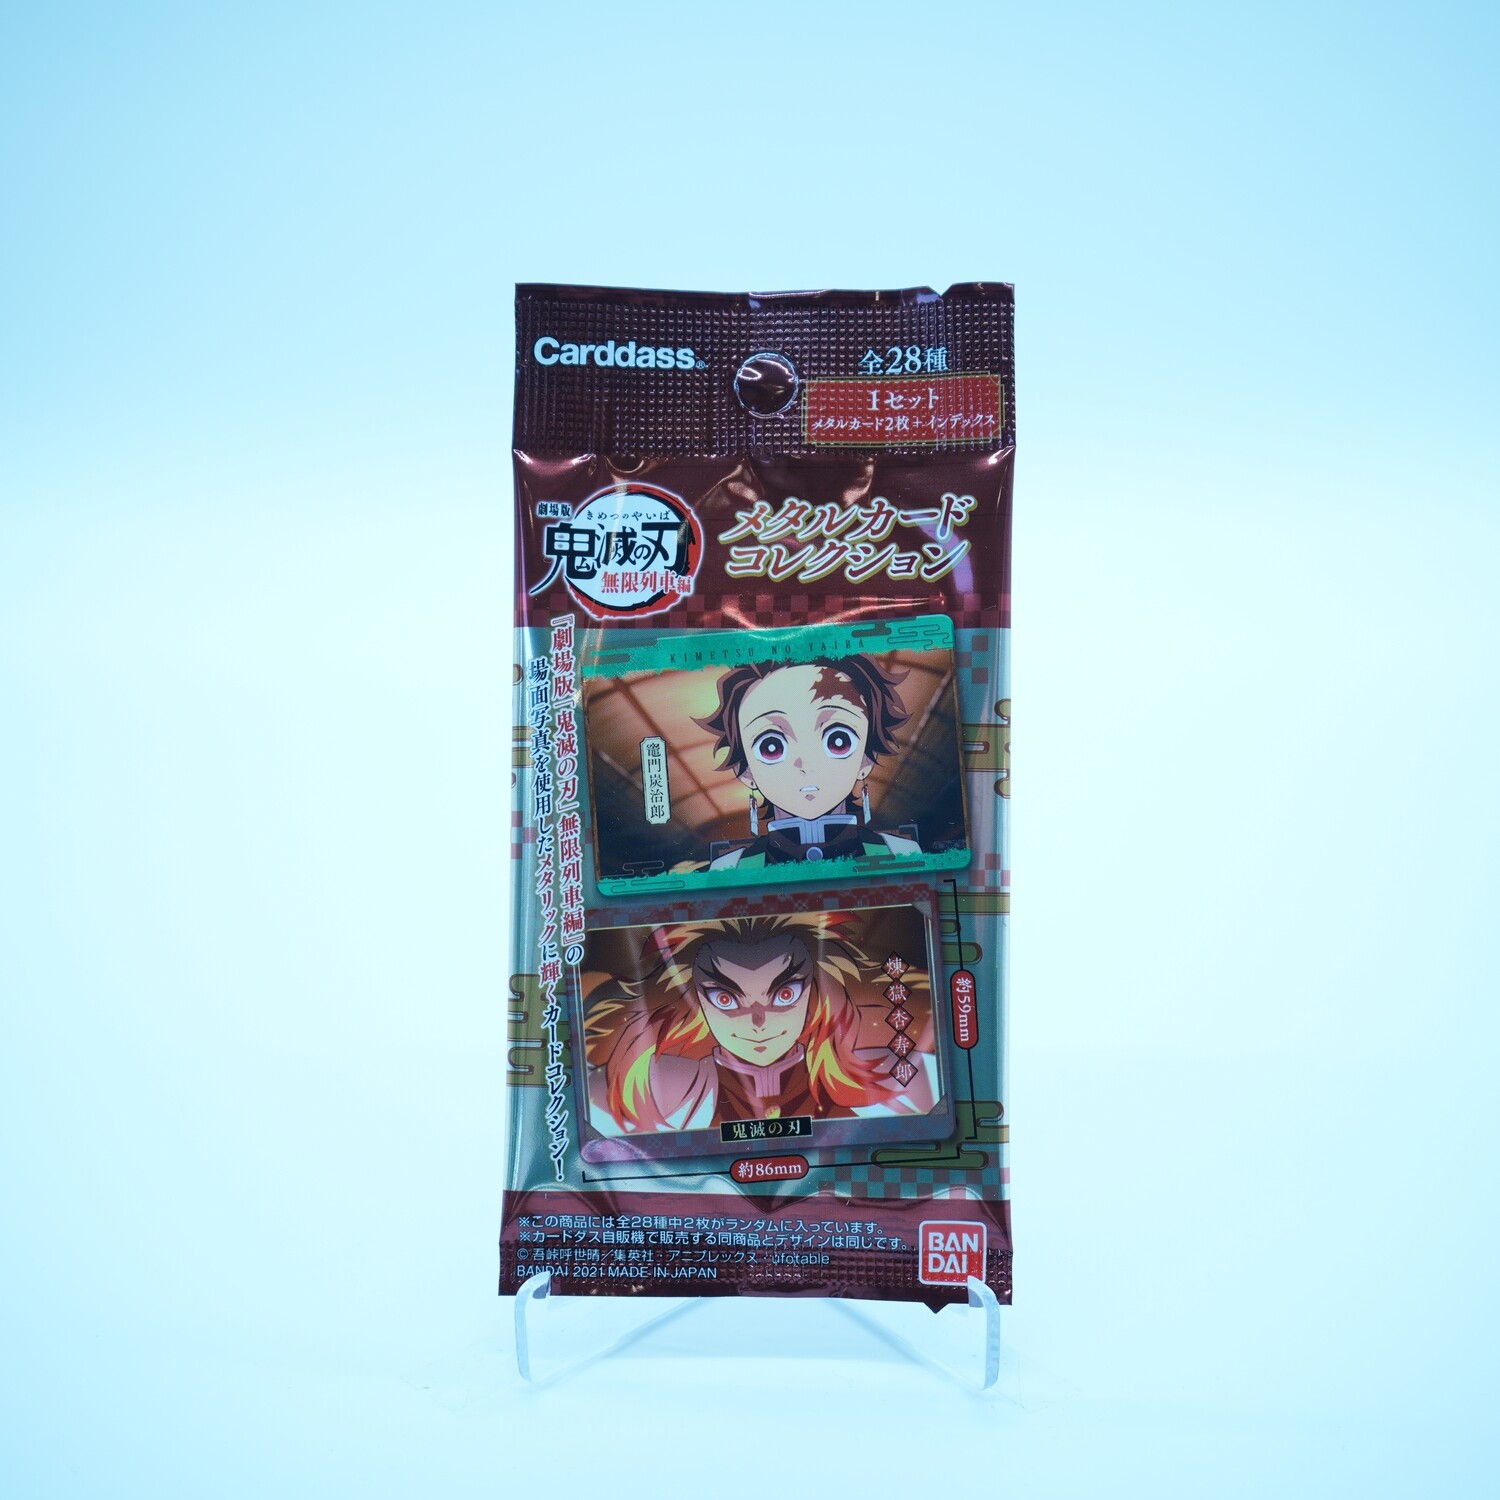 Carddass : Demon Slayer Metal Card Collection Booster